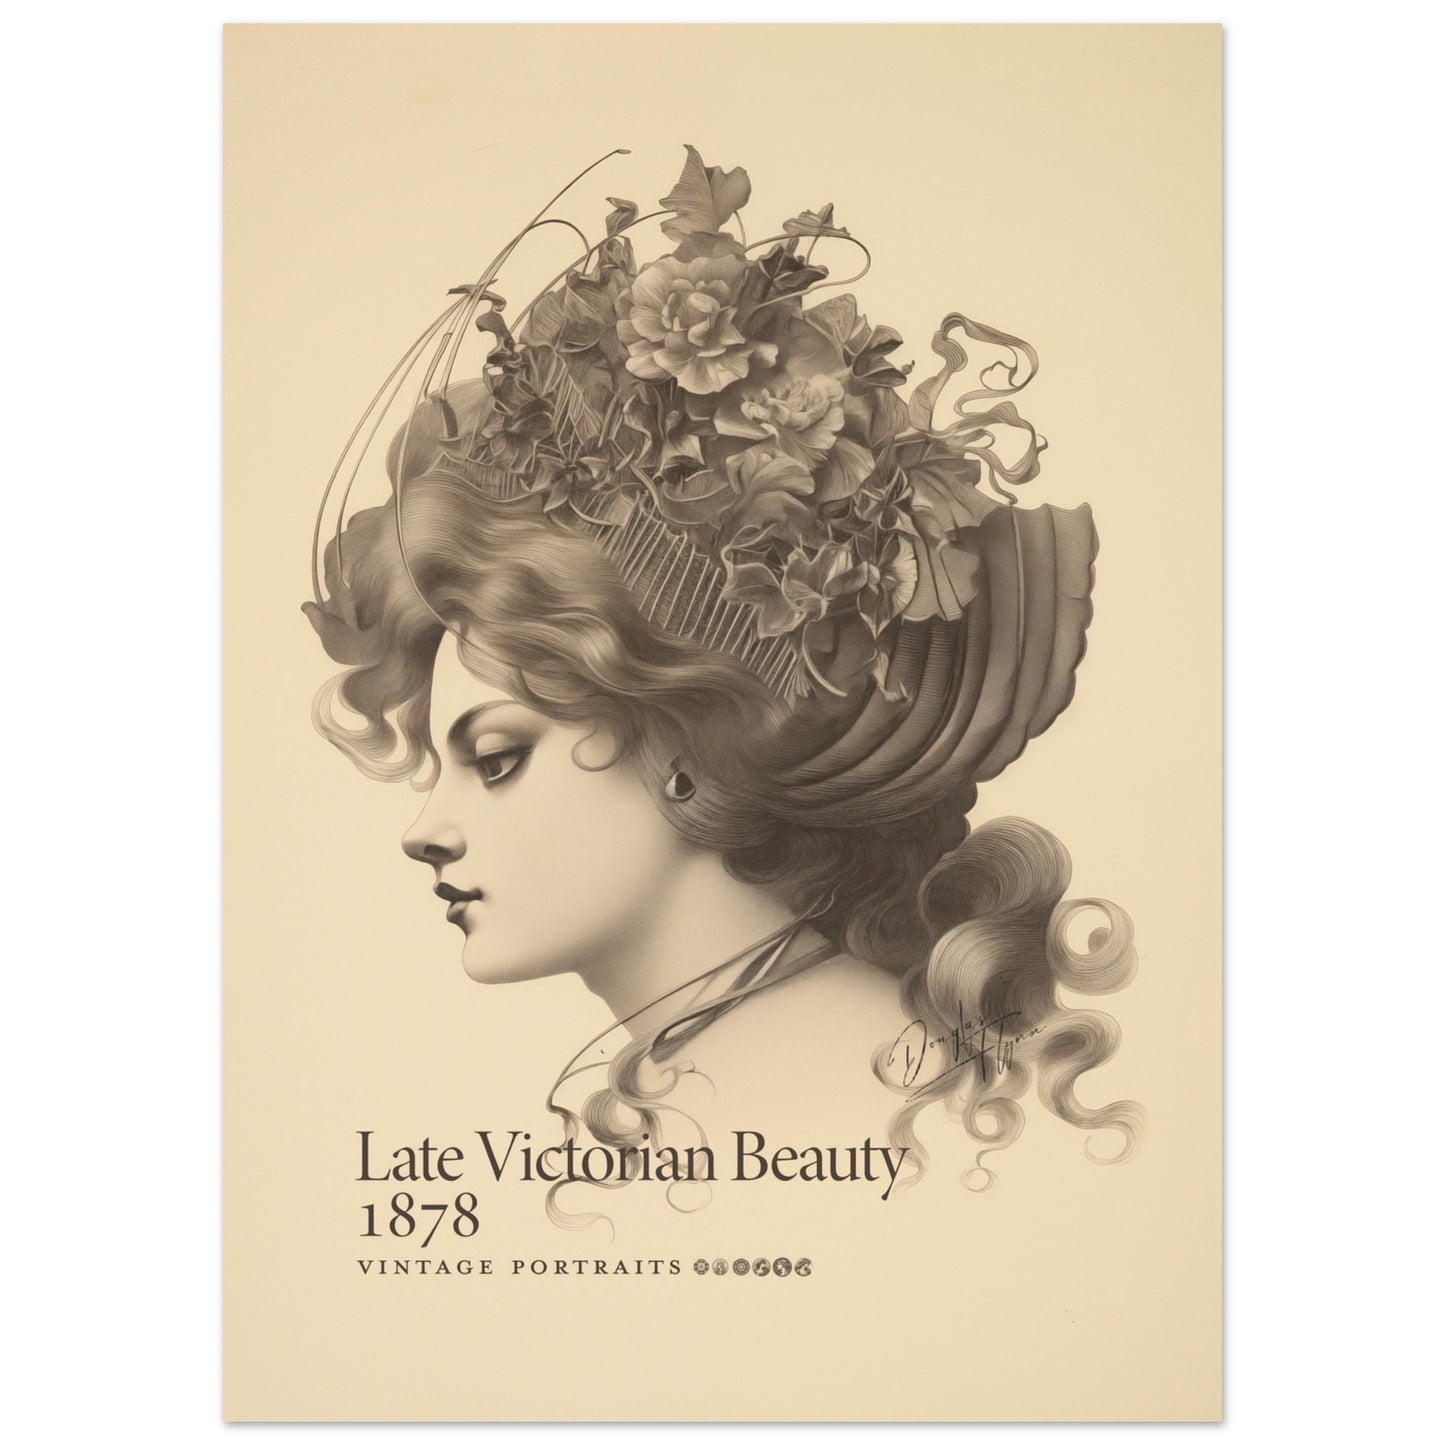 »Late Victorian Beauty 1878«